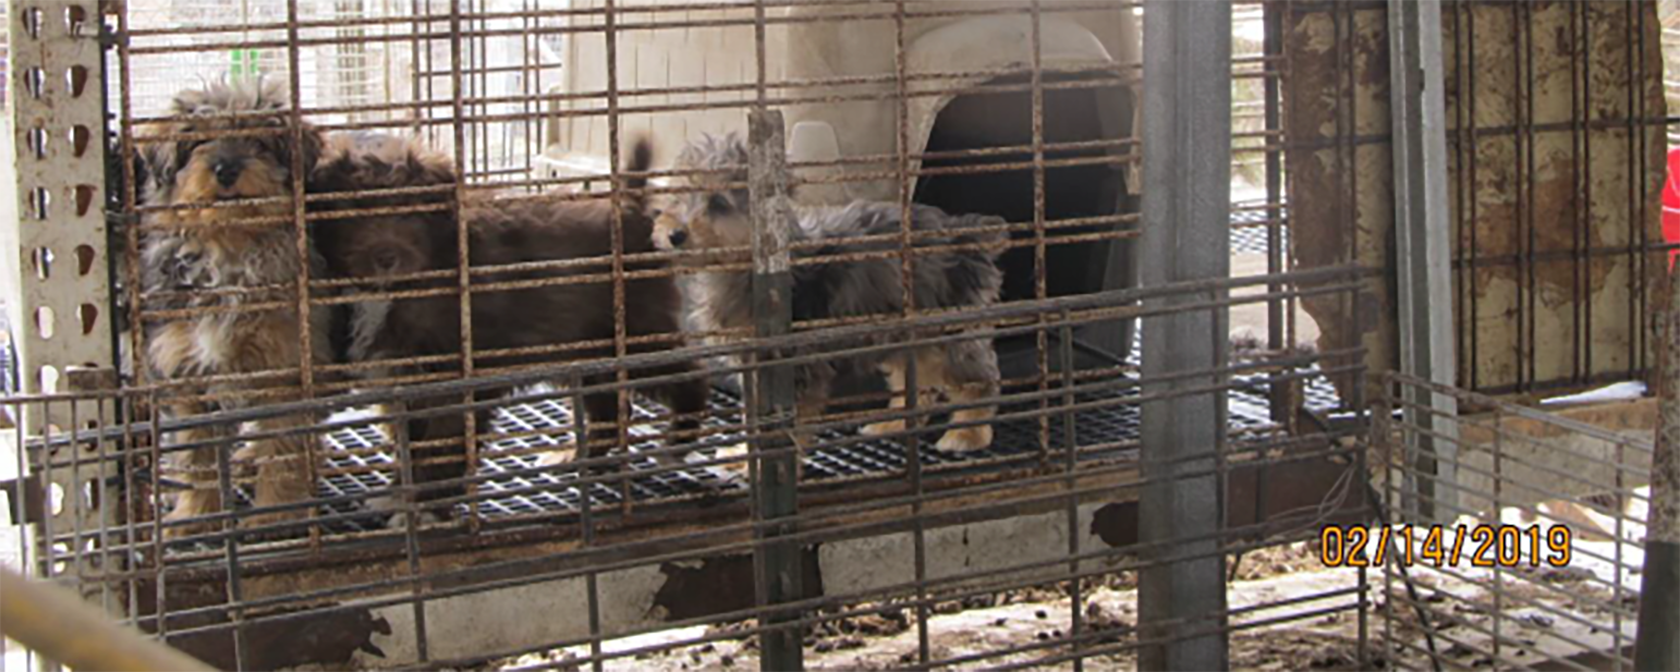 Revealed 100 reprehensible U.S. puppy mills in Horrible Hundred report